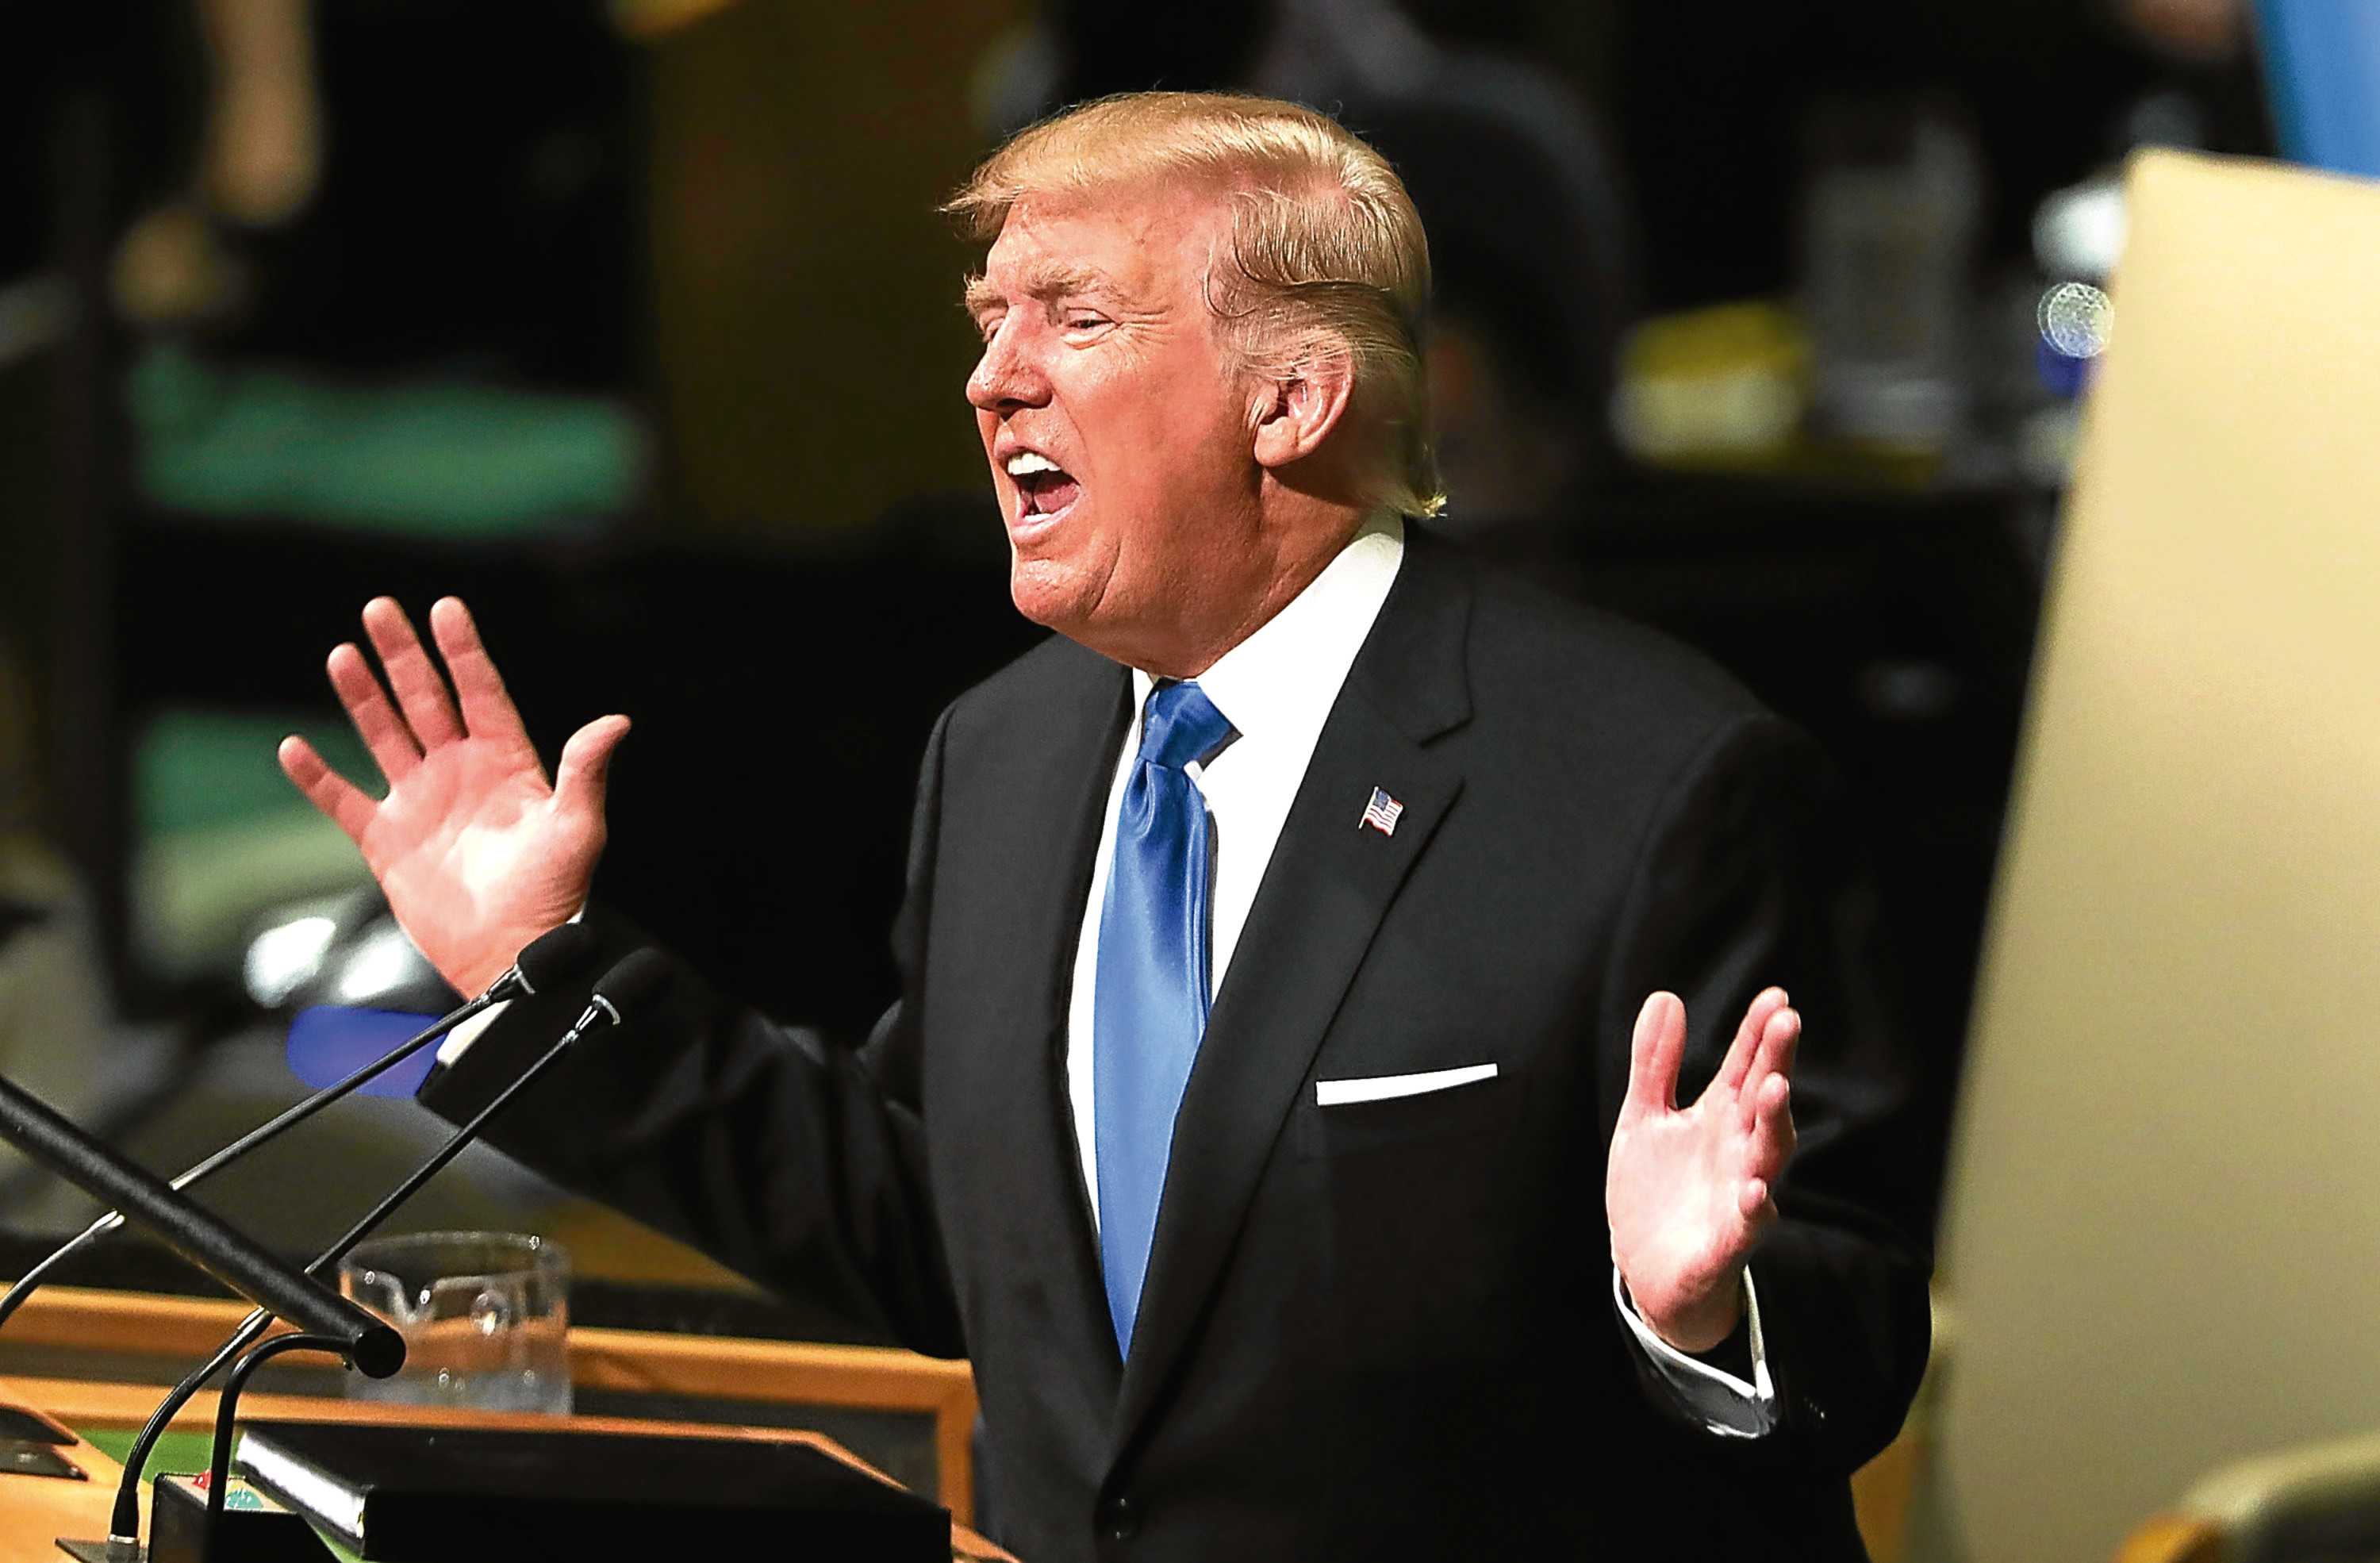 President Donald Trump speaks to world leaders at the 72nd United Nations (UN) General Assembly at UN headquarters in New York.